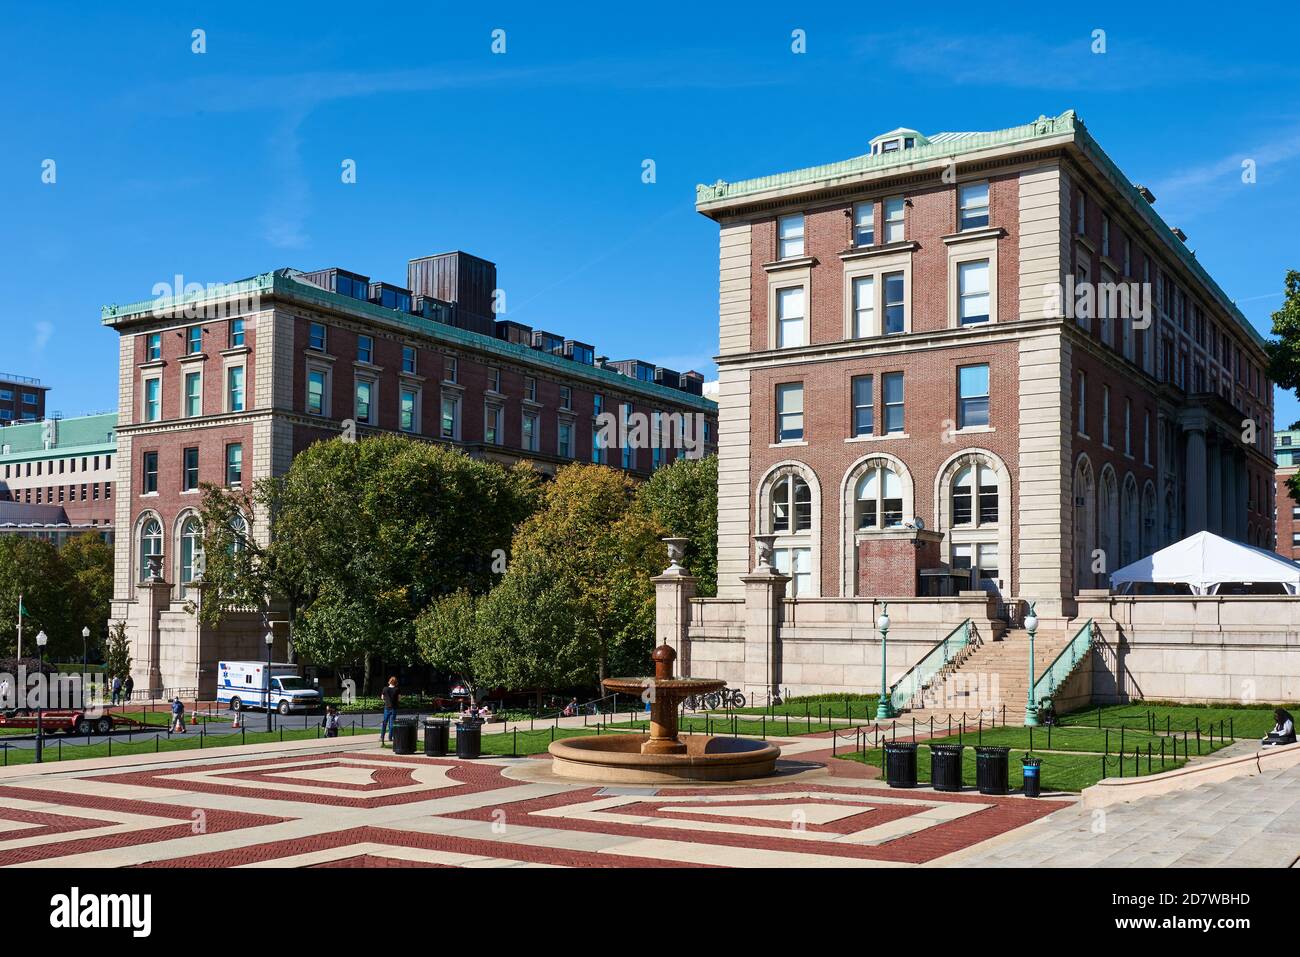 Columbia University's Dodge Hall and Pulitzer Hall seen across a plaza paved with red and white brick in a bold geometric pattern. Stock Photo